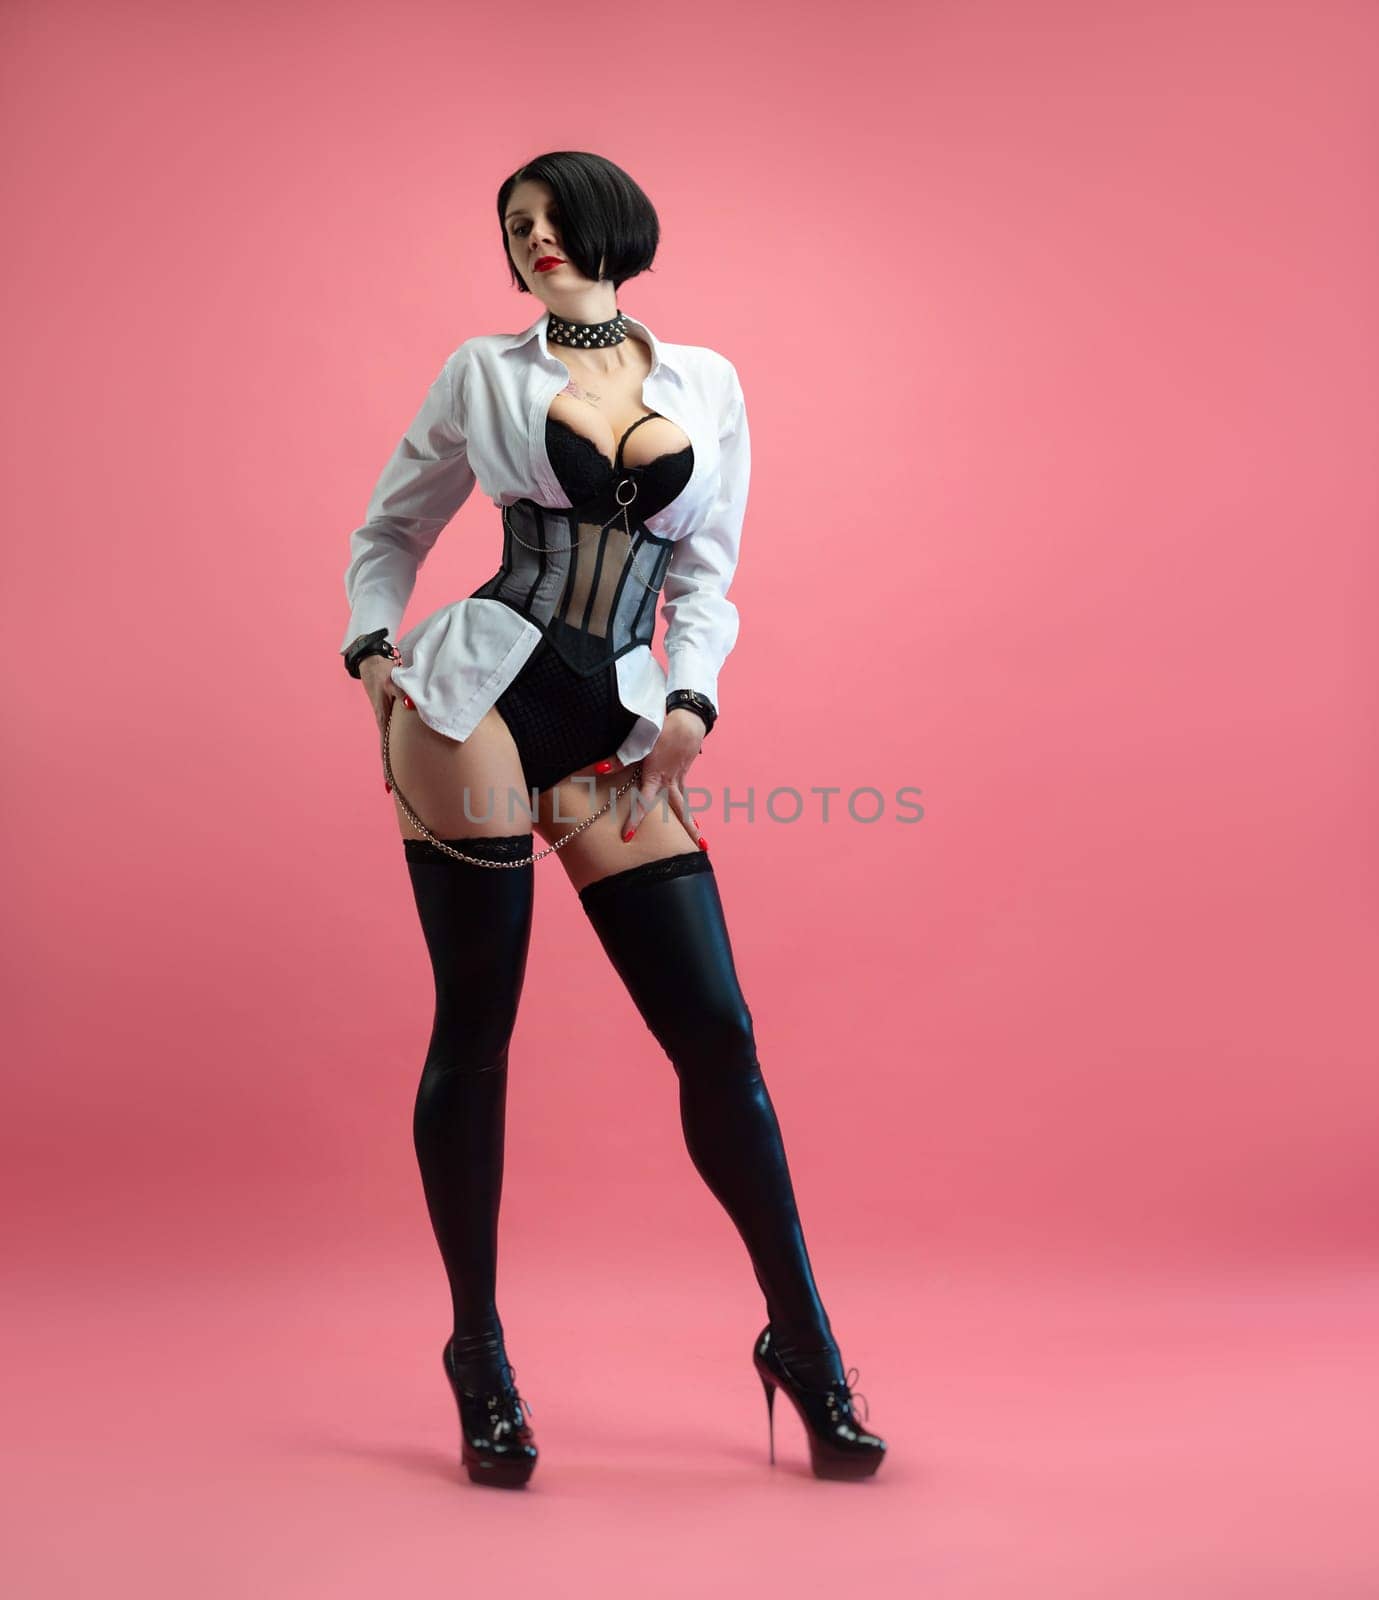 sexy woman with glasses, in a BDSM mistress costume in stockings, posing sexually on pink copy paste background